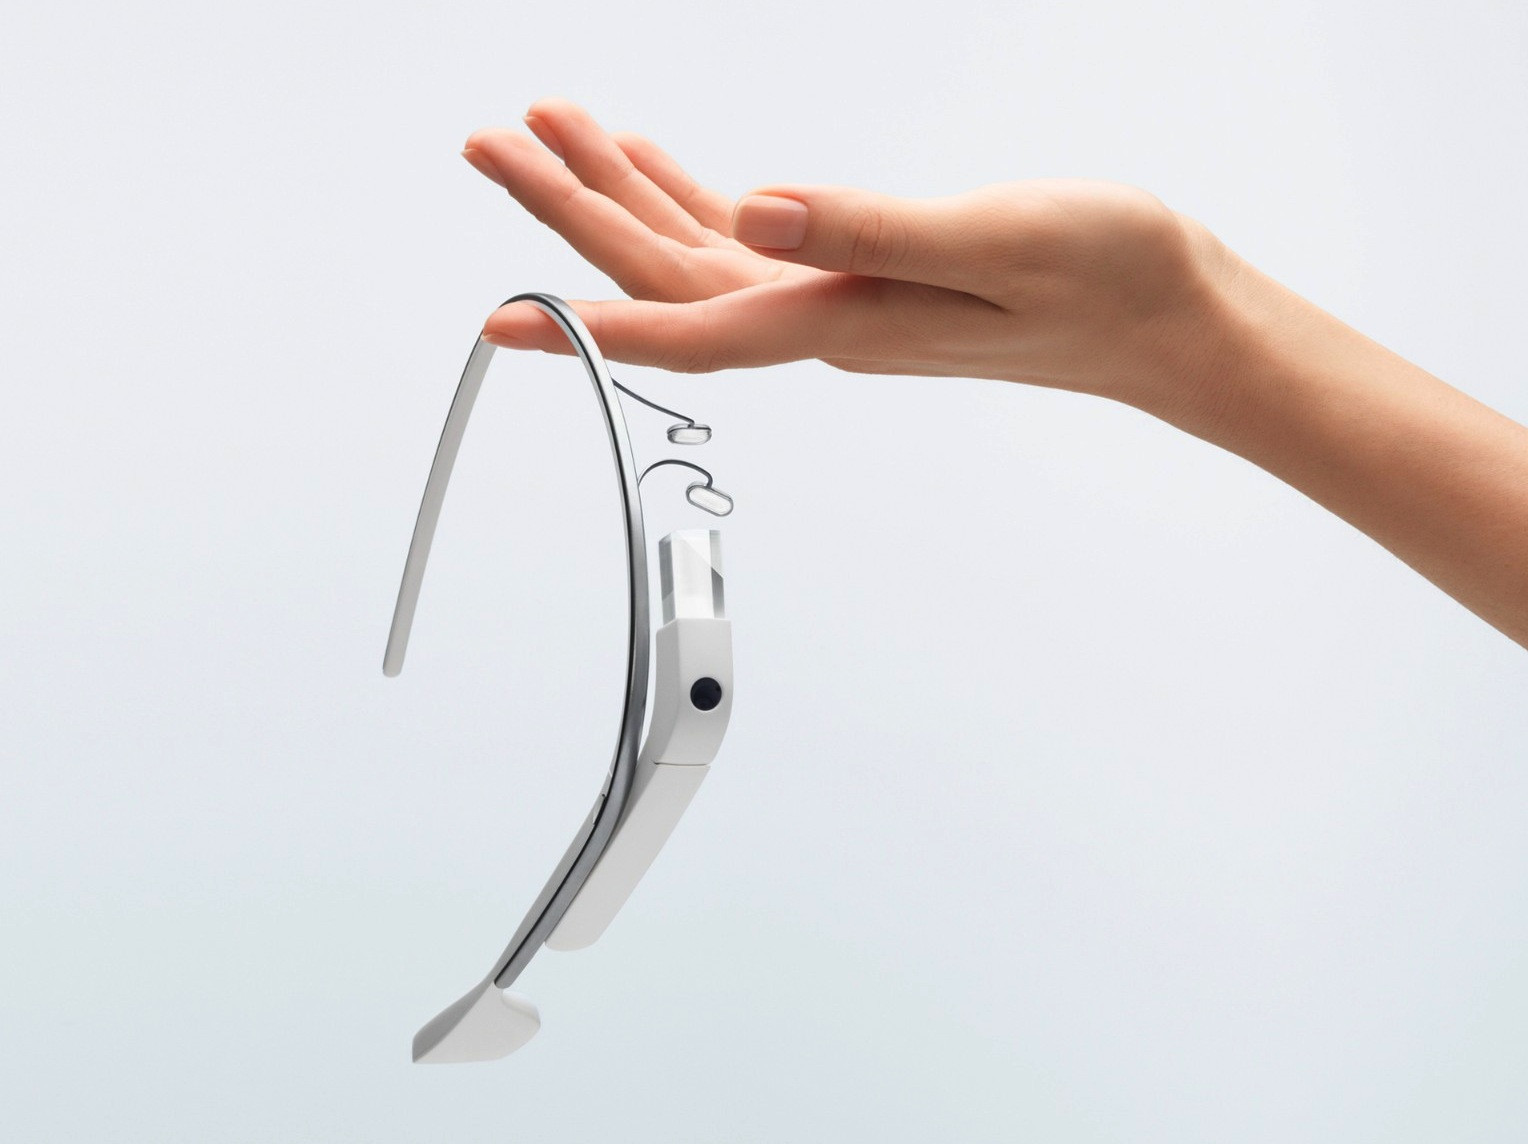 1361367567_google-releases-project-glass-video-capture-and-details-expands-pre-orders-2.jpg